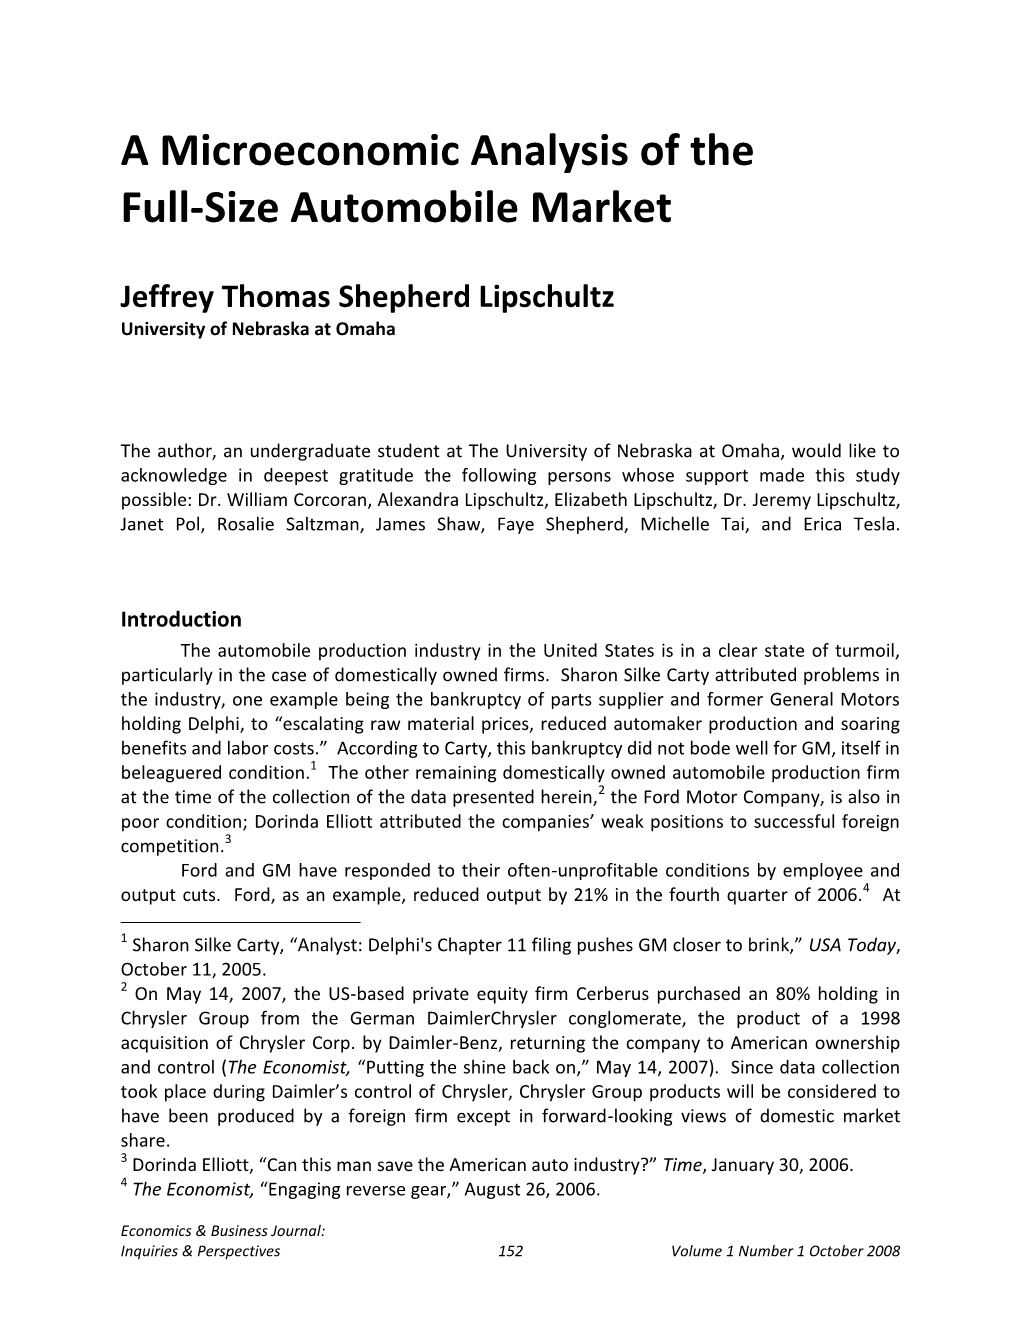 A Microeconomic Analysis of the Full-Size Automobile Market